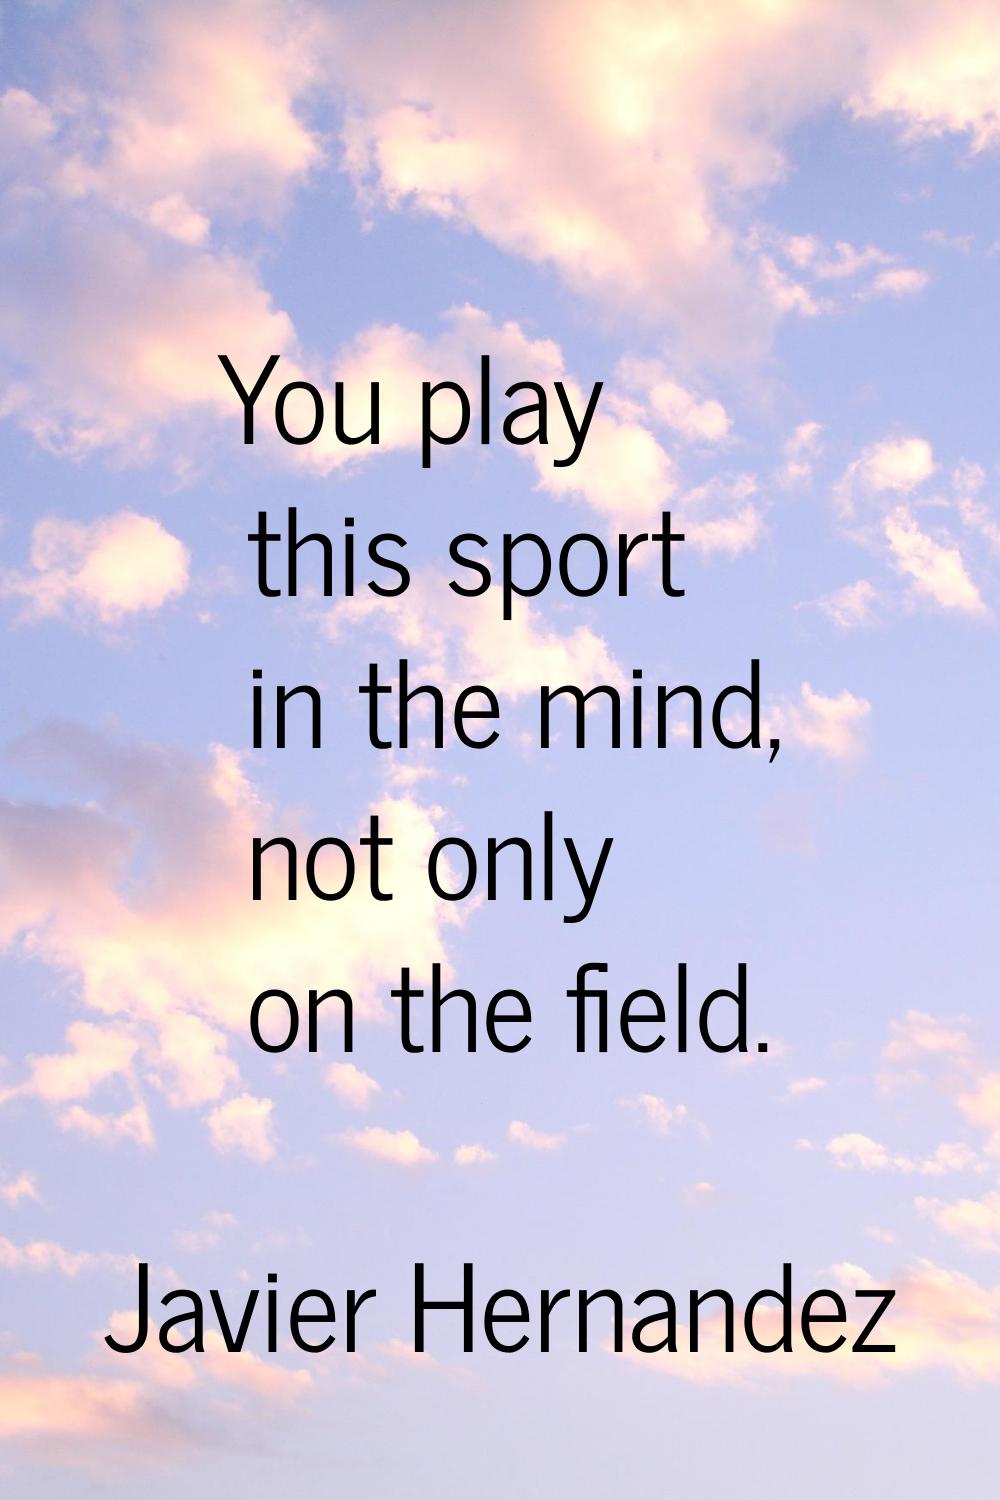 You play this sport in the mind, not only on the field.